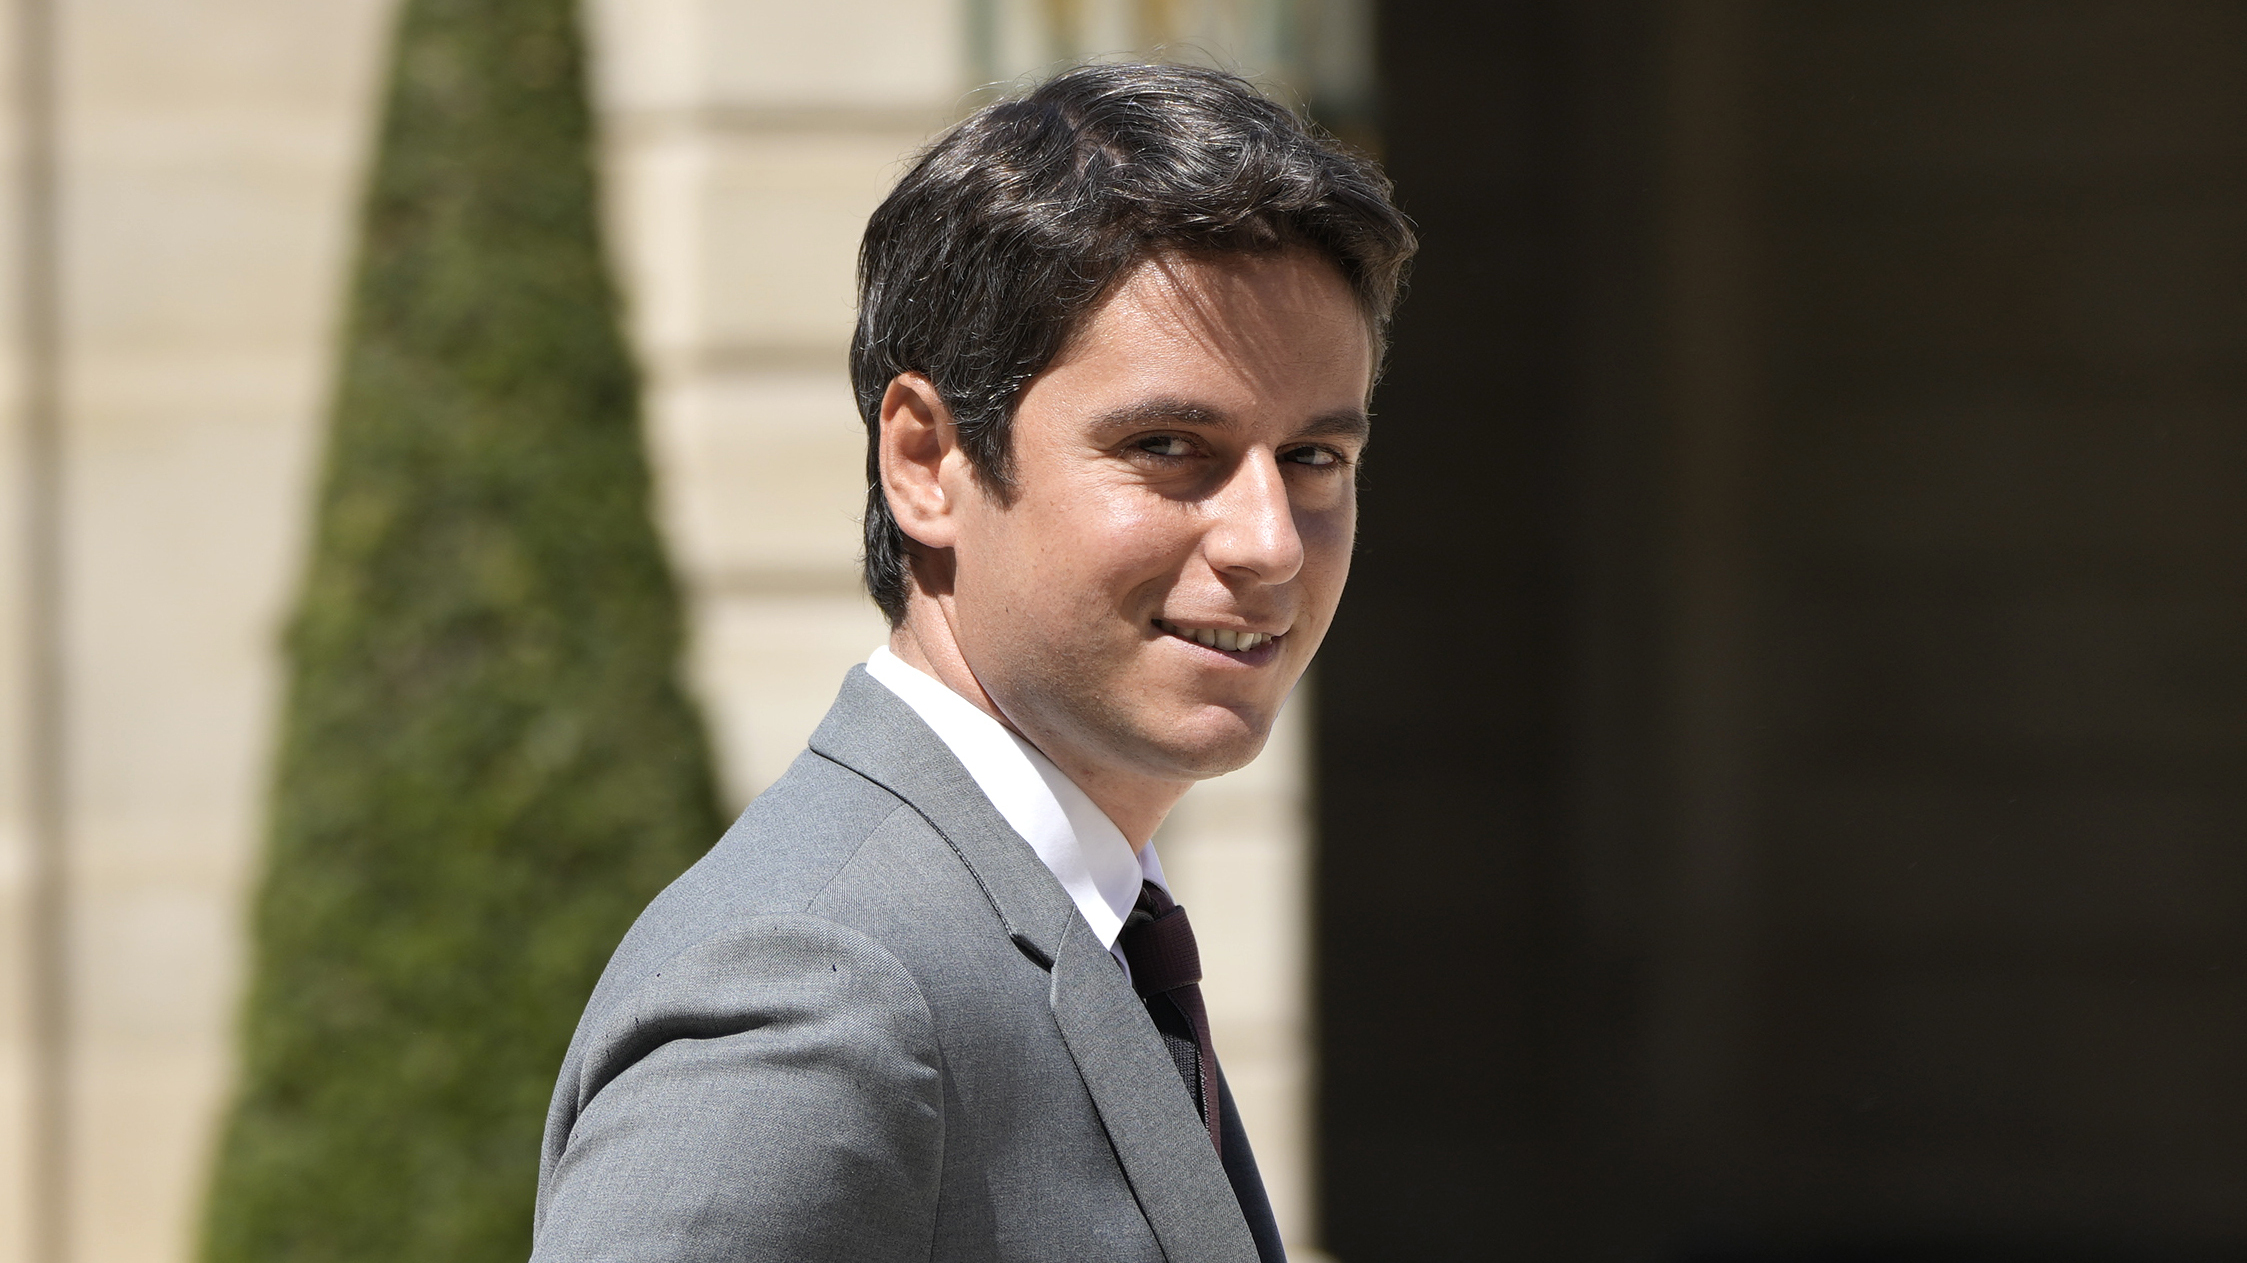 Gabriel Attal is France’s youngest-ever and first openly gay prime minister